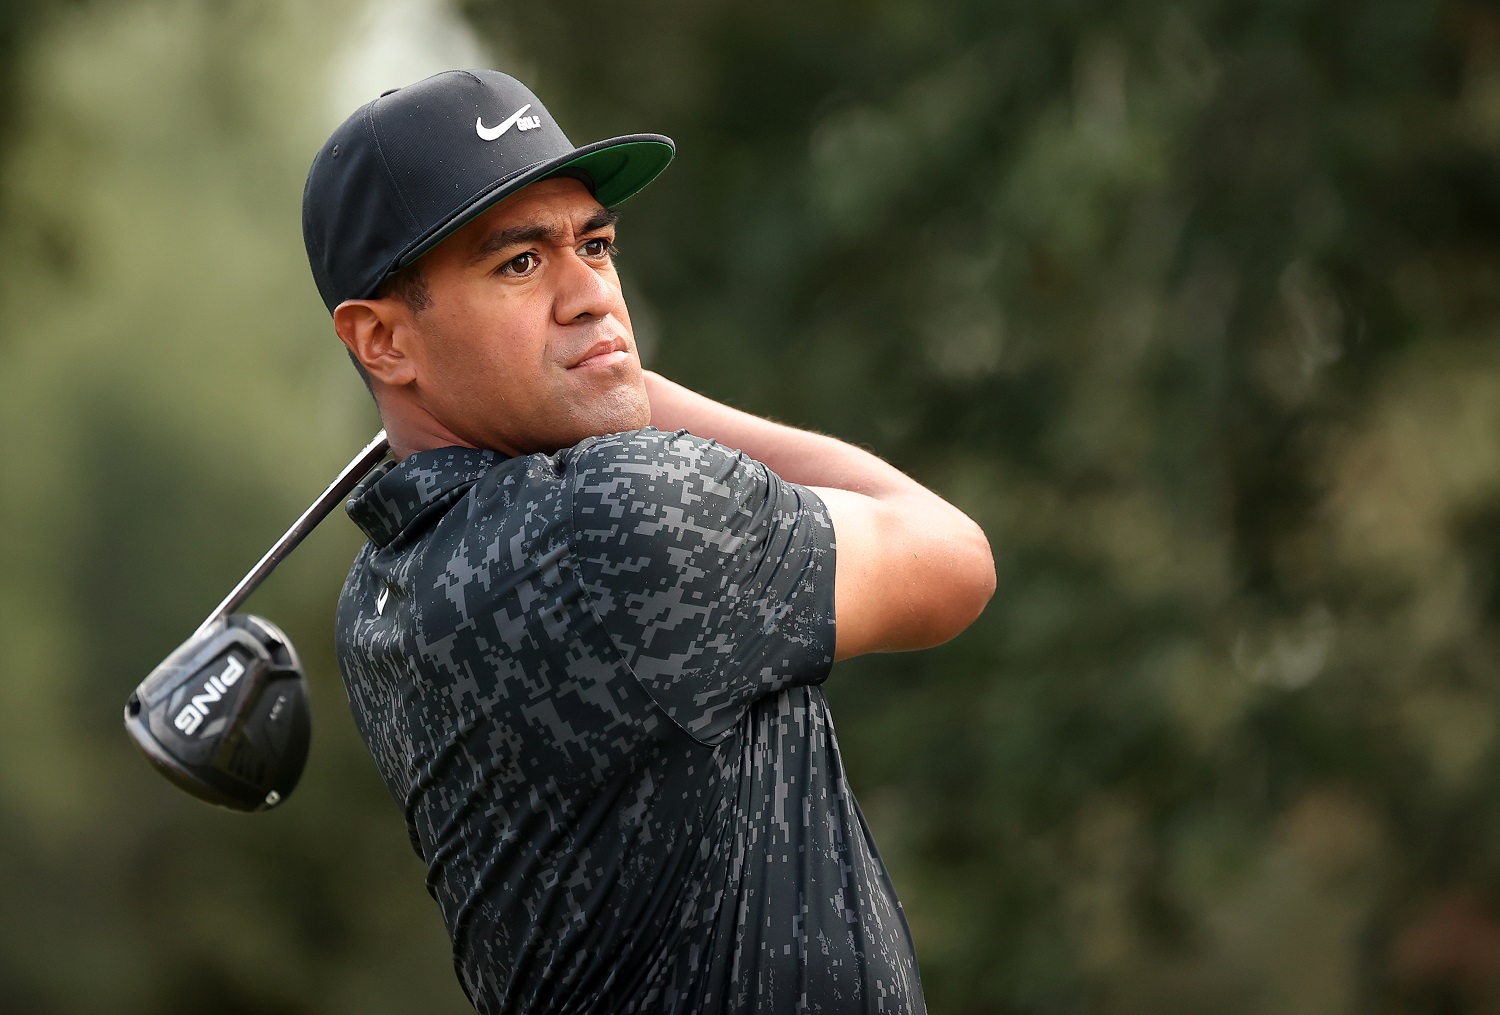 PGA Tour veteran Tony Finau hasn't fared better than a tie for 45th early in the new PGA Tour season, but he's in contention at an exclusive event in the Bahamas. | Carmen Mandato/Getty Images